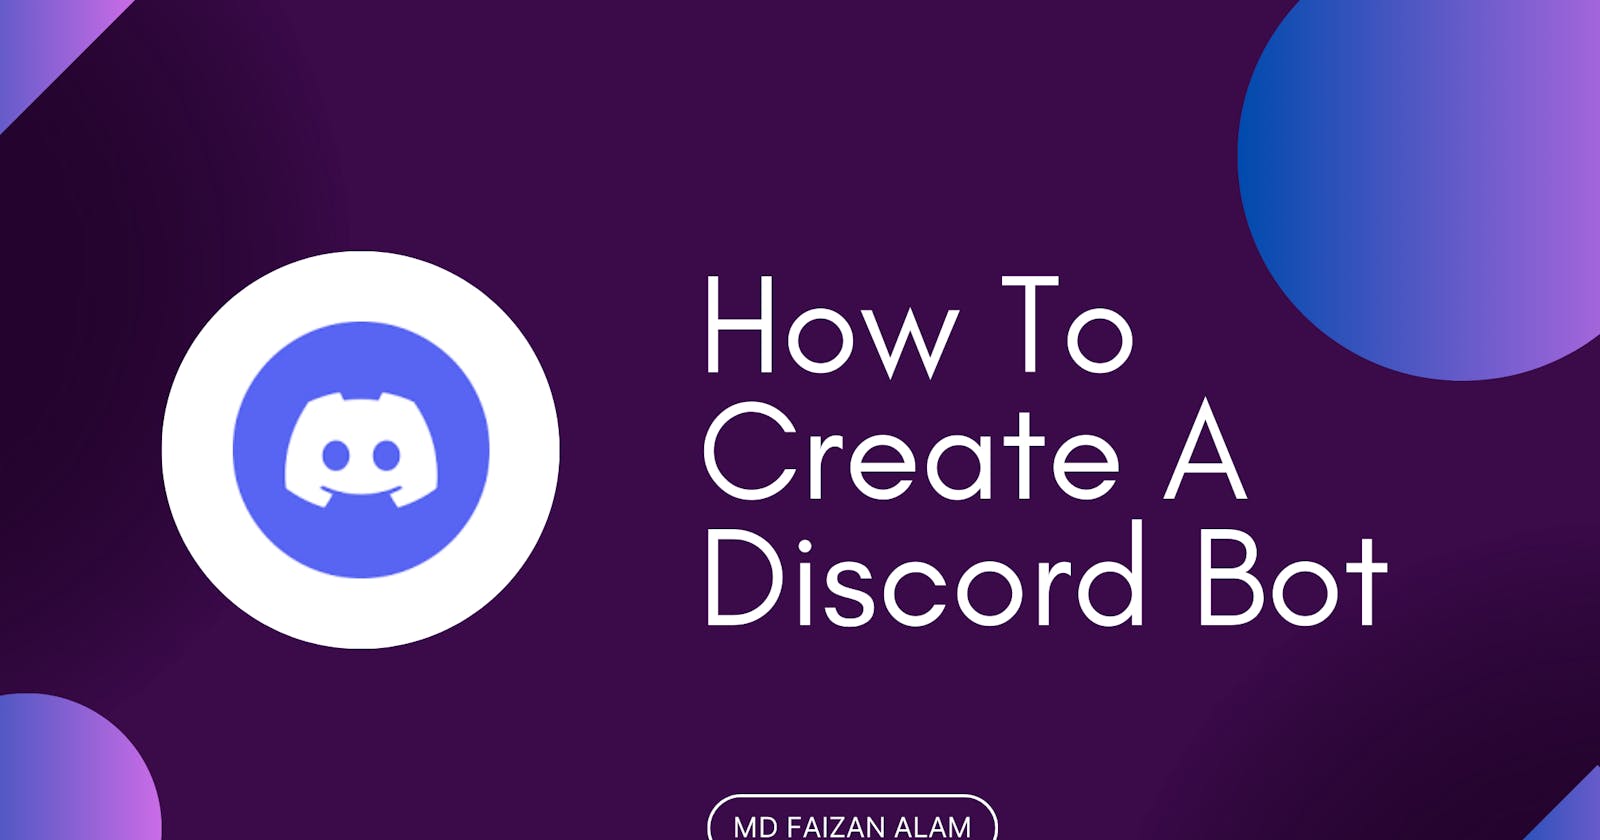 How To Create A Discord Bot